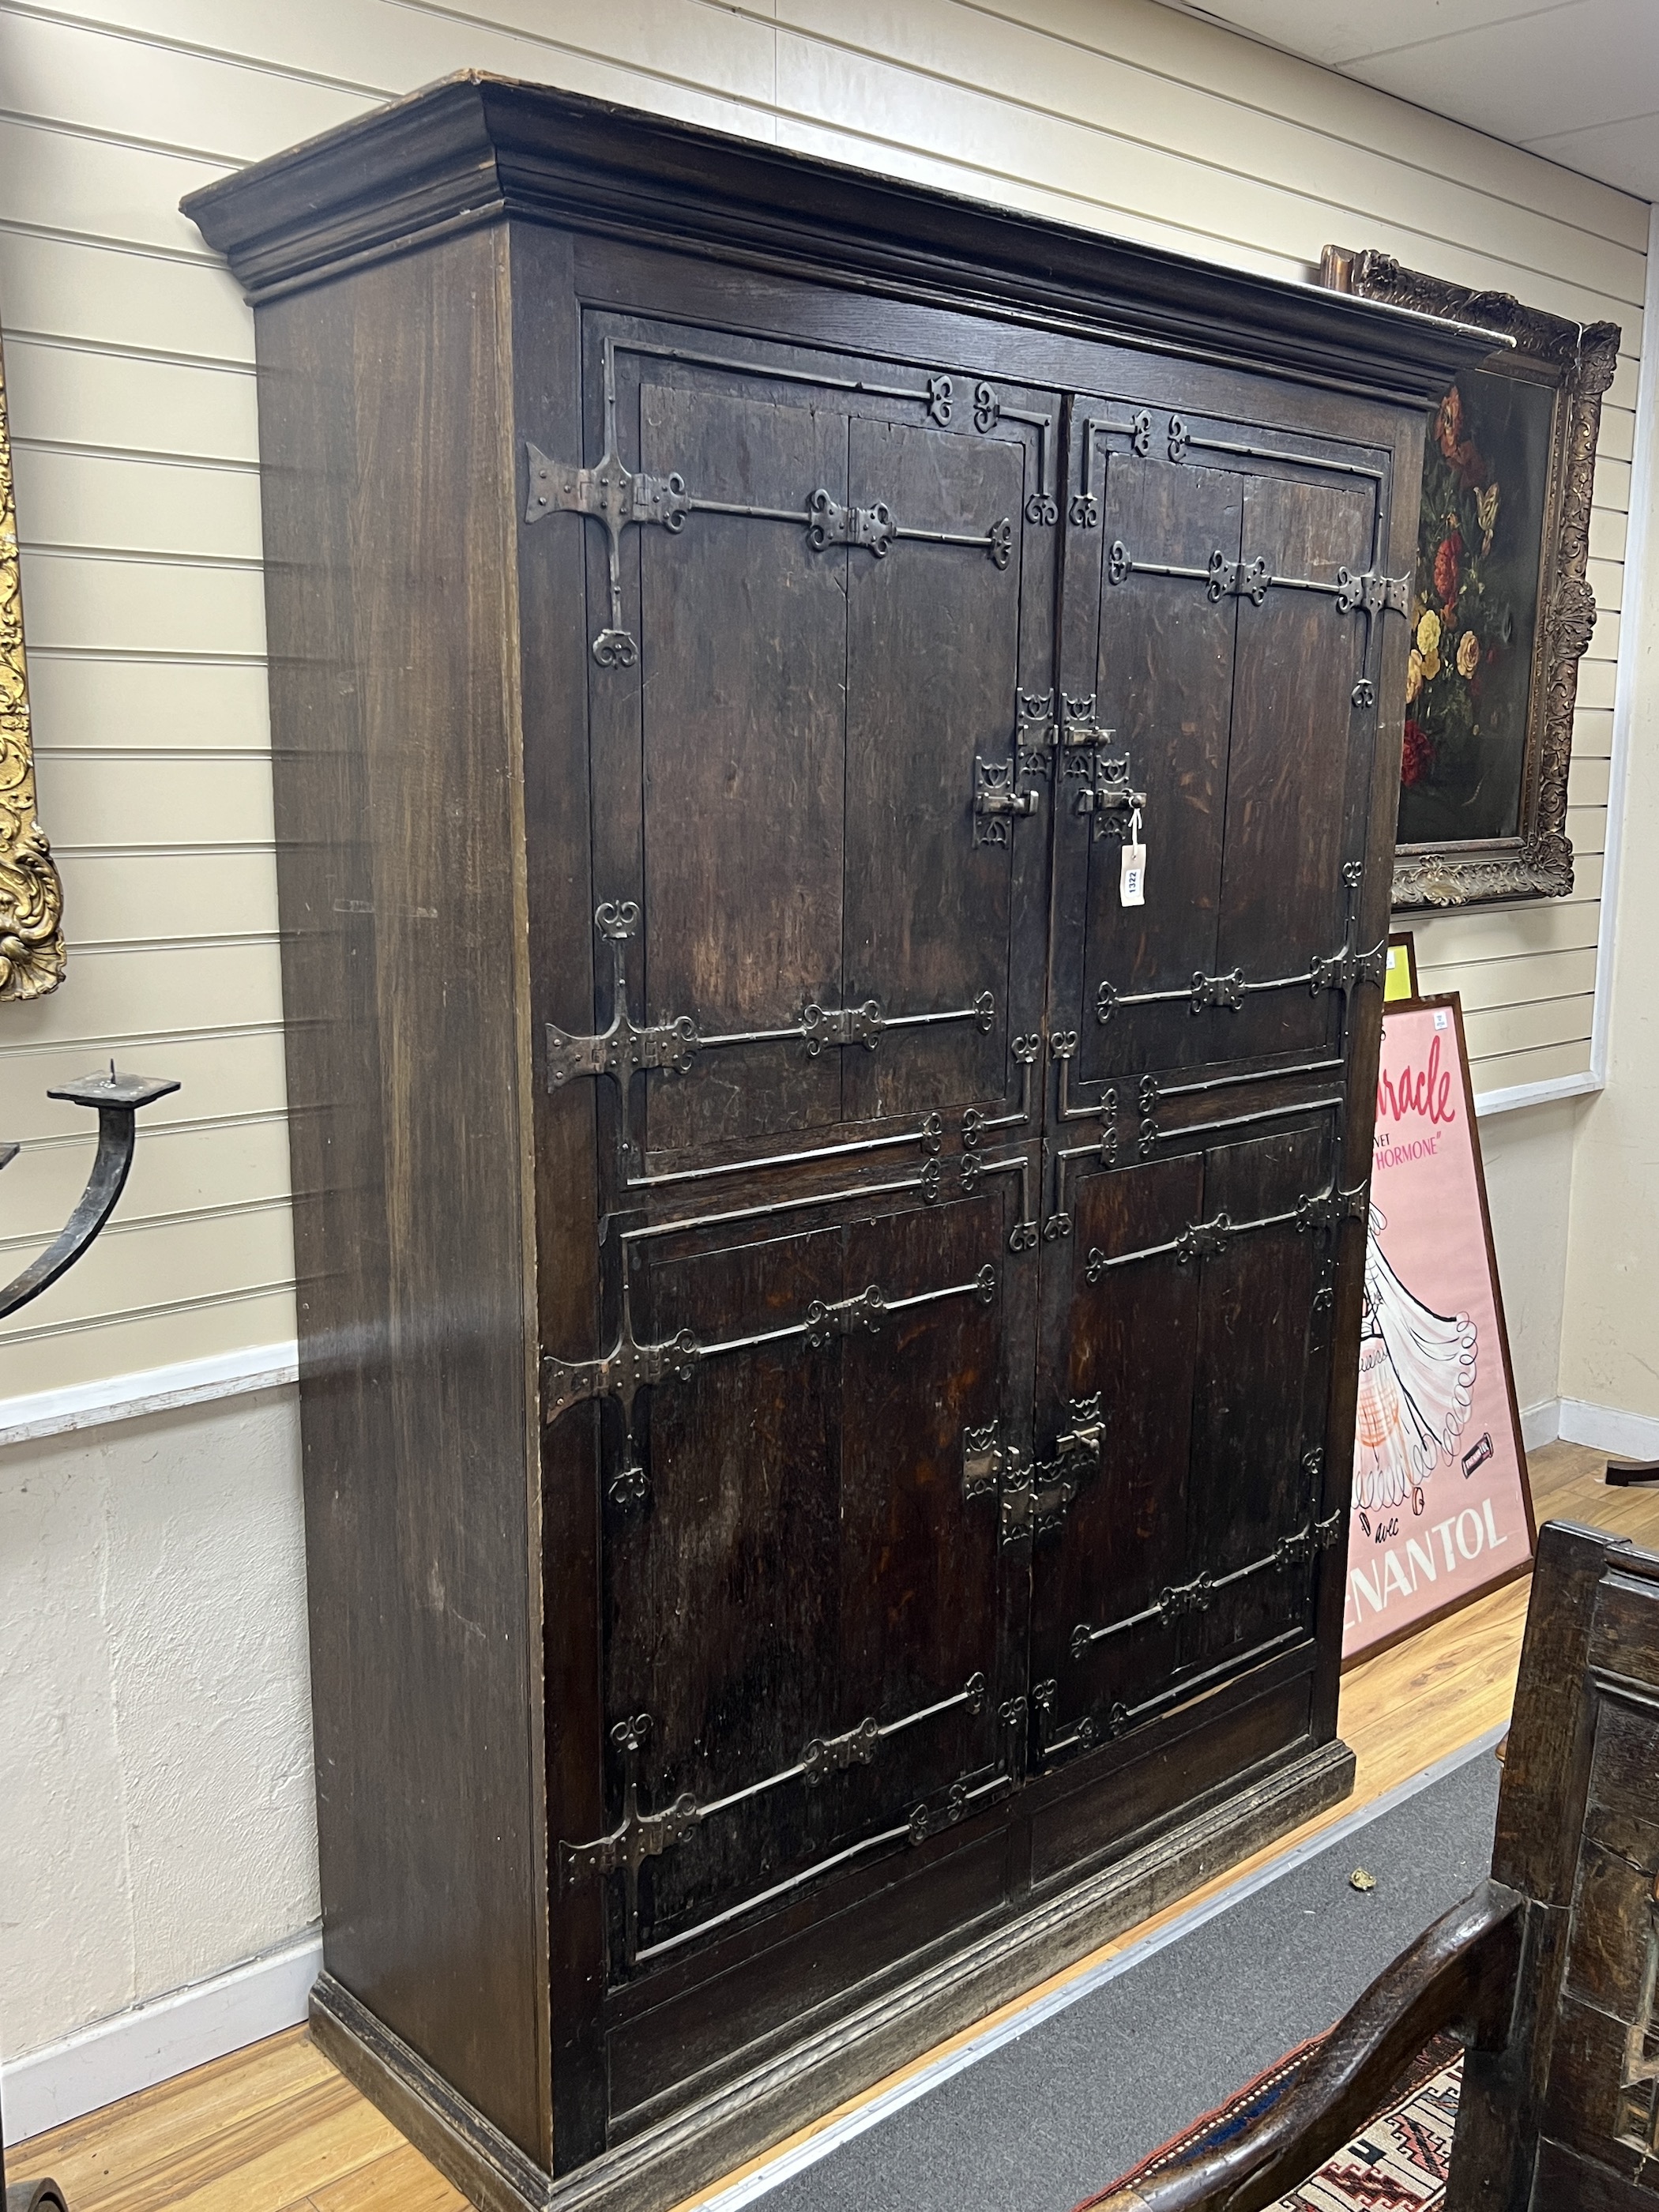 A pair of 16th century German or Netherlandish oak and wrought iron strapwork window shutters, later mounted on a cupboard, the moulded cornice above two pairs of hinged shutters, (previously bi-fold), mounted with elabo